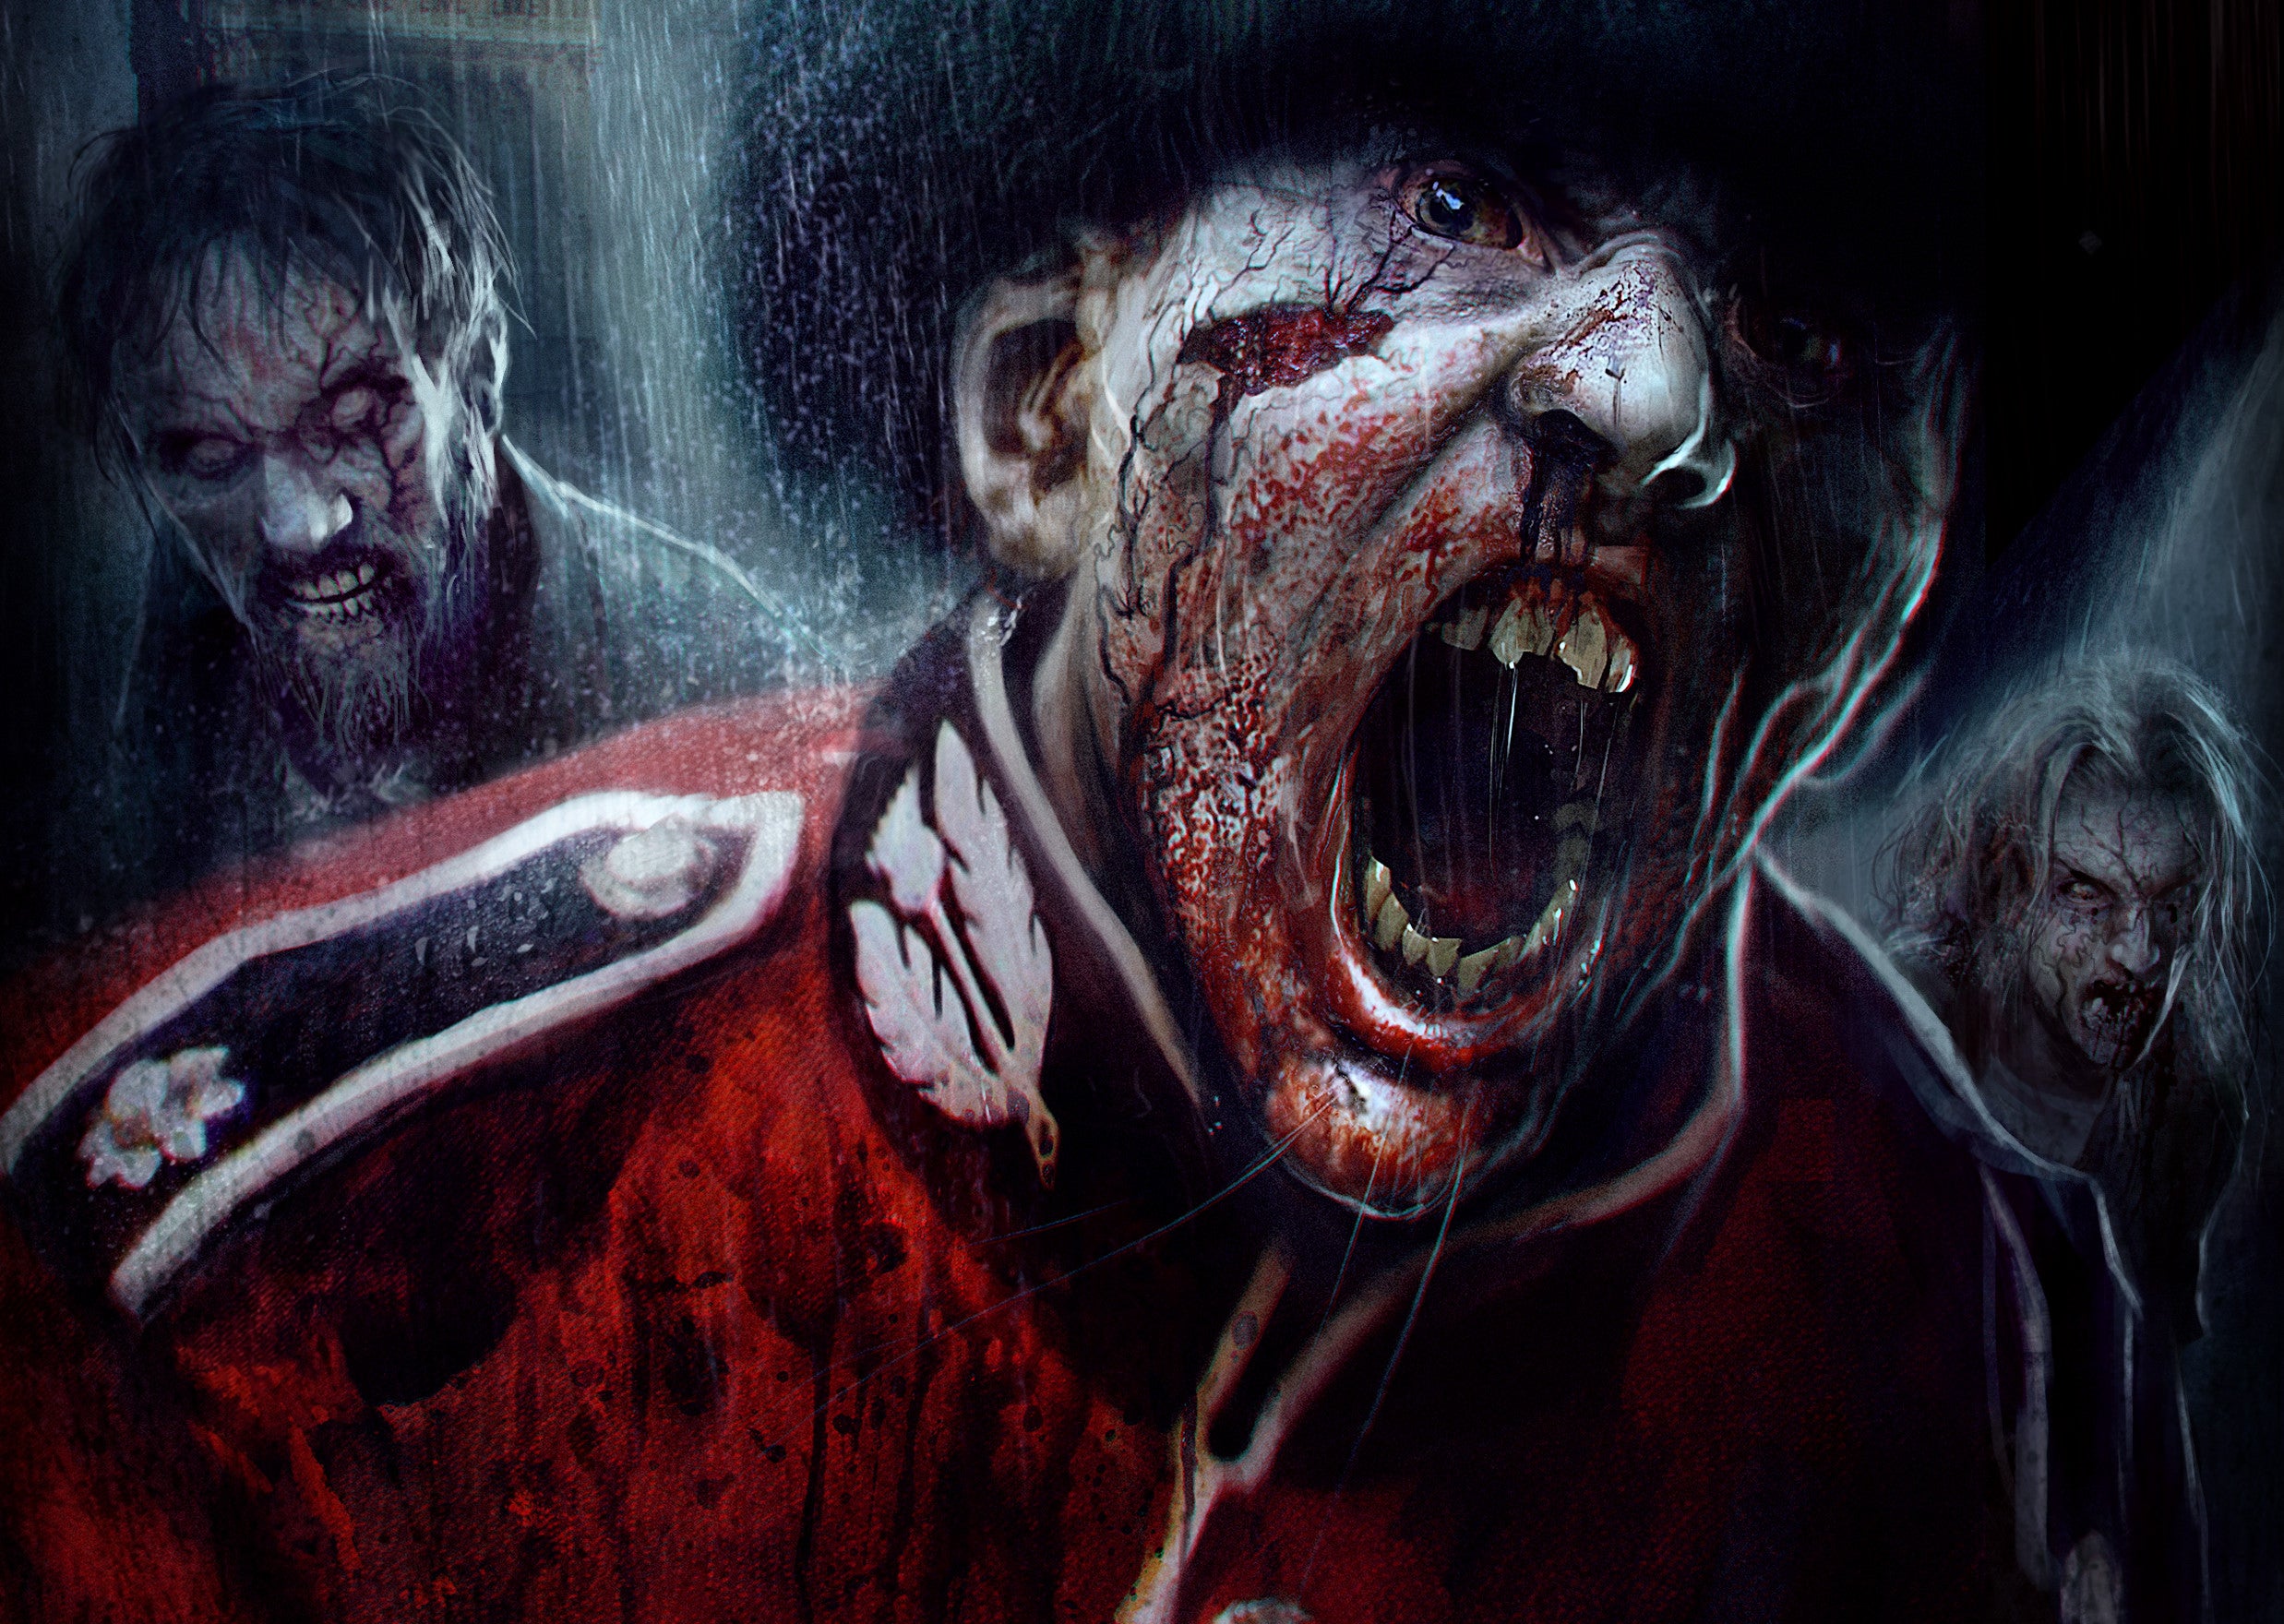 Image for Zombi is heading to retail in early 2016